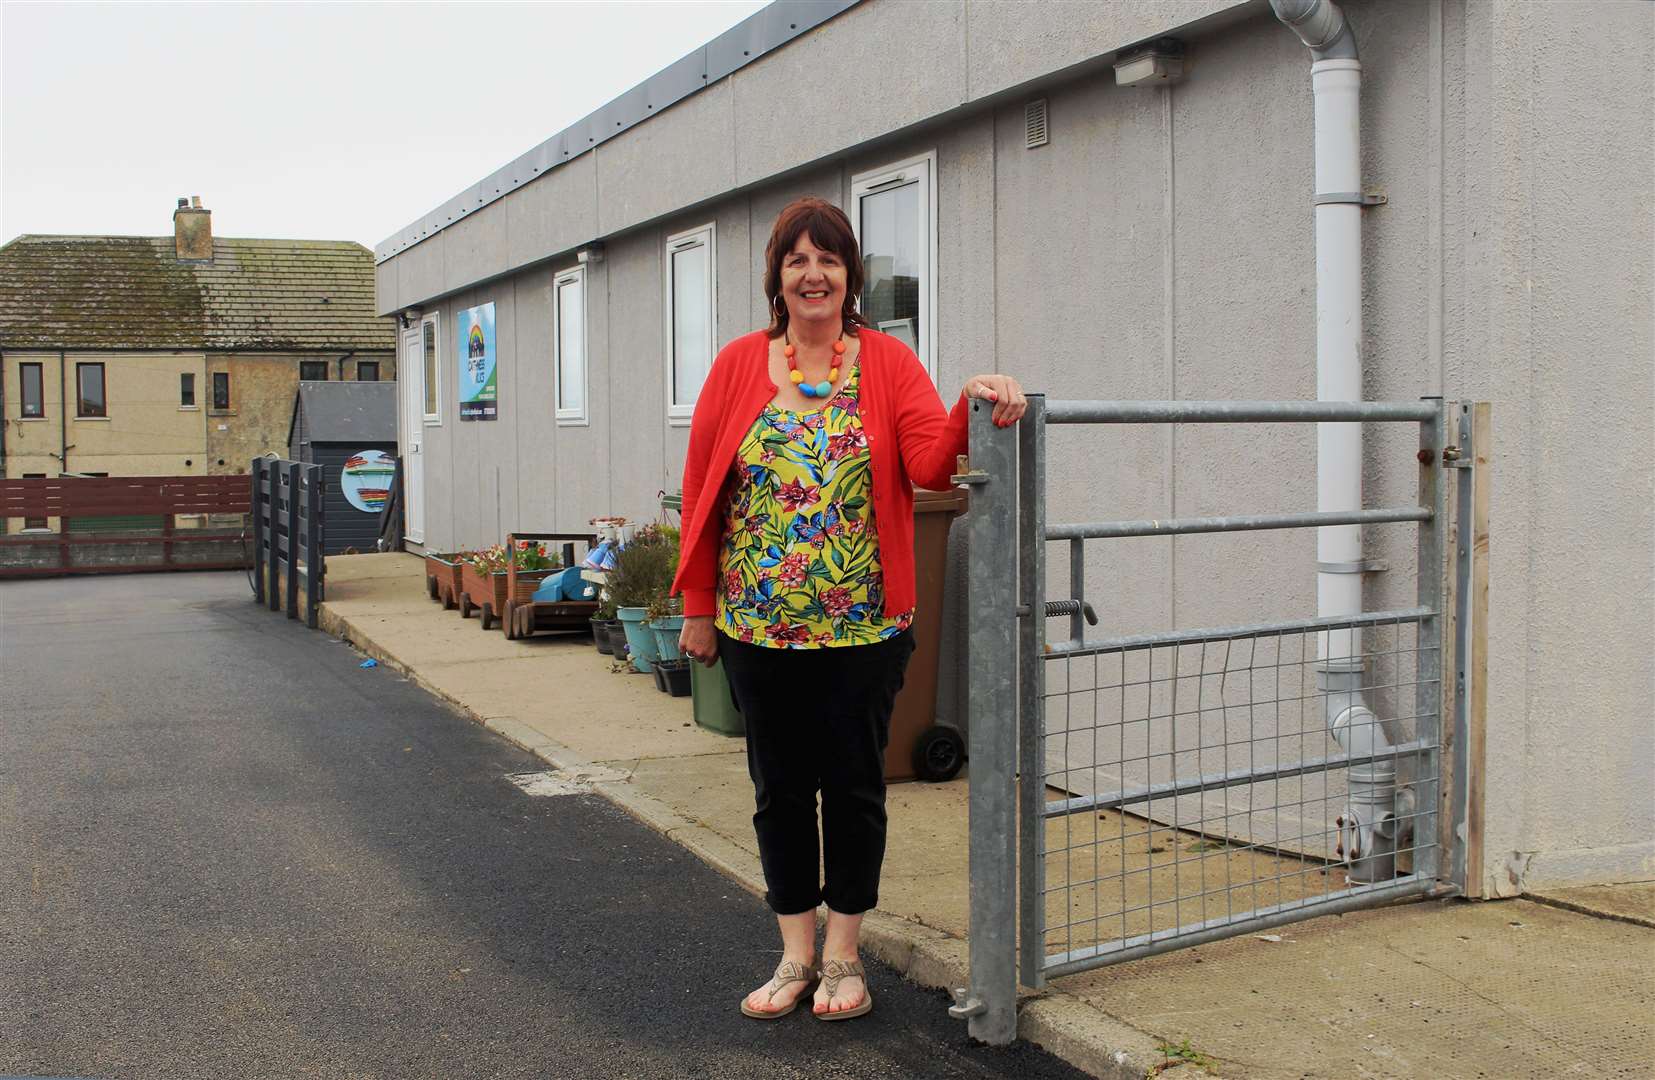 Pat Ramsay, vice-chairperson of Caithness Klics, beside an existing pedestrian gate at the charity's premises in Macleod Road, Wick. Klics' plans would mean a gate giving access to the parking area at the site being moved forward from its previous position.